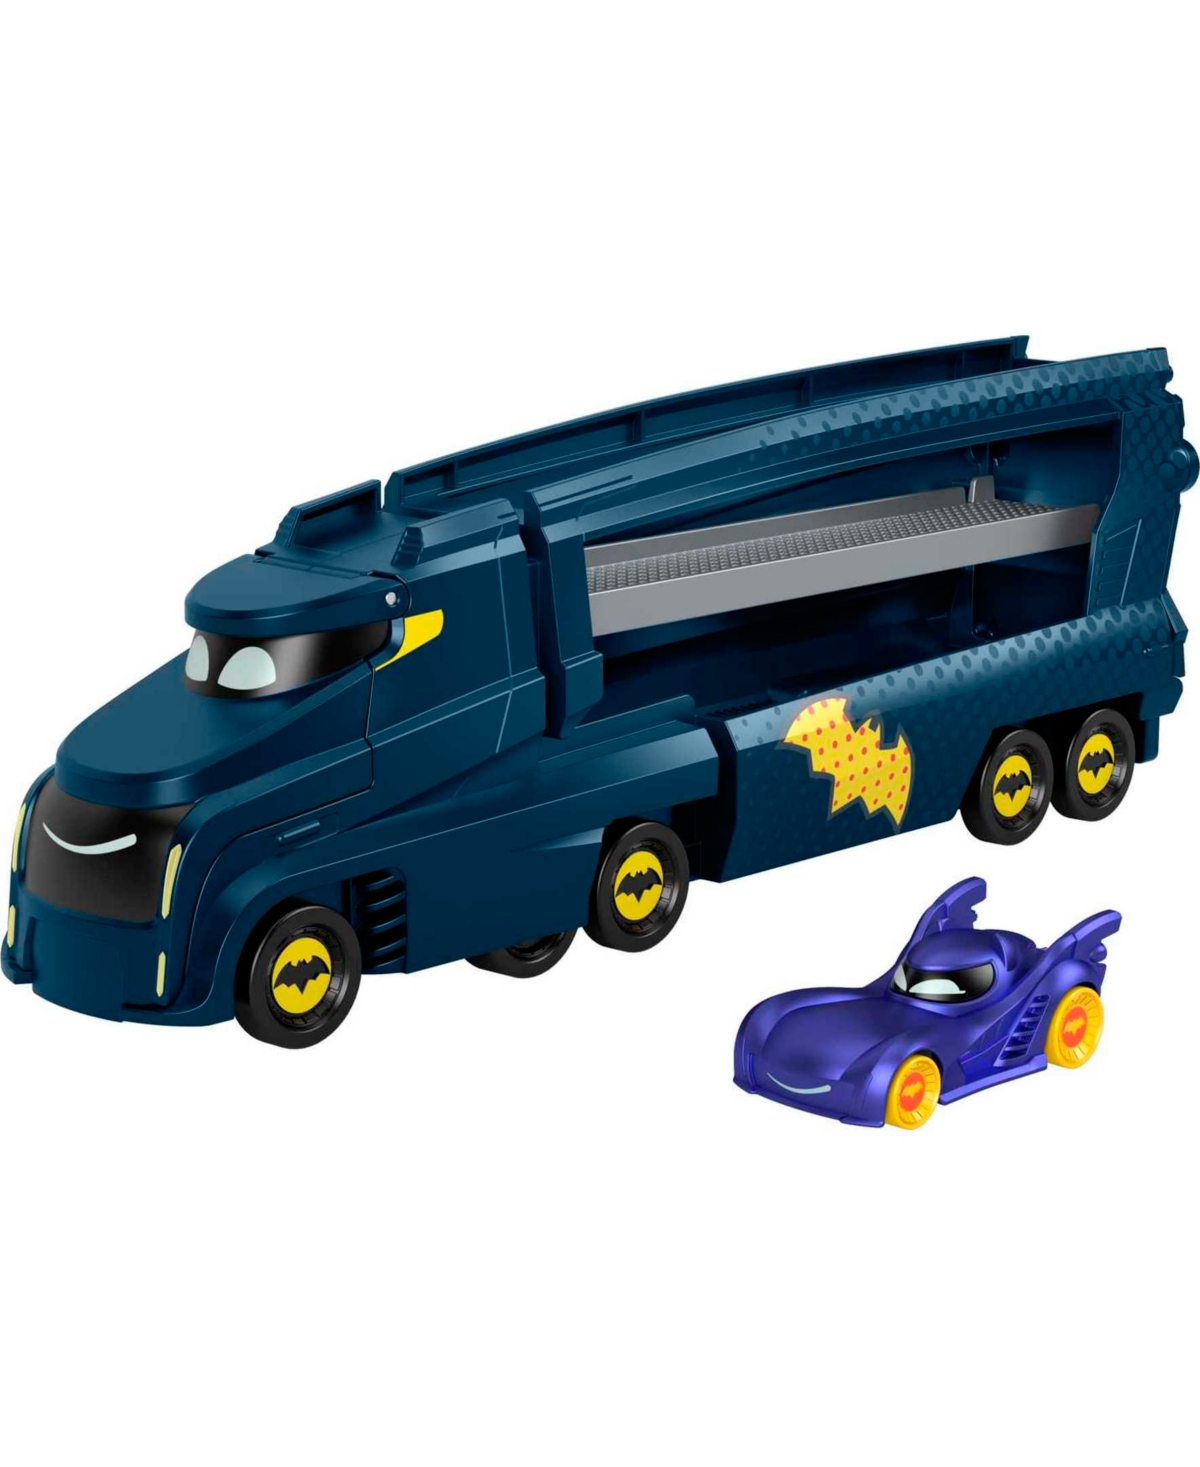 Batwheels Kids' Fisher-price Dc Toy Hauler And Car, Bat-big Rig With Ramp And Vehicle Storage In Multi-color